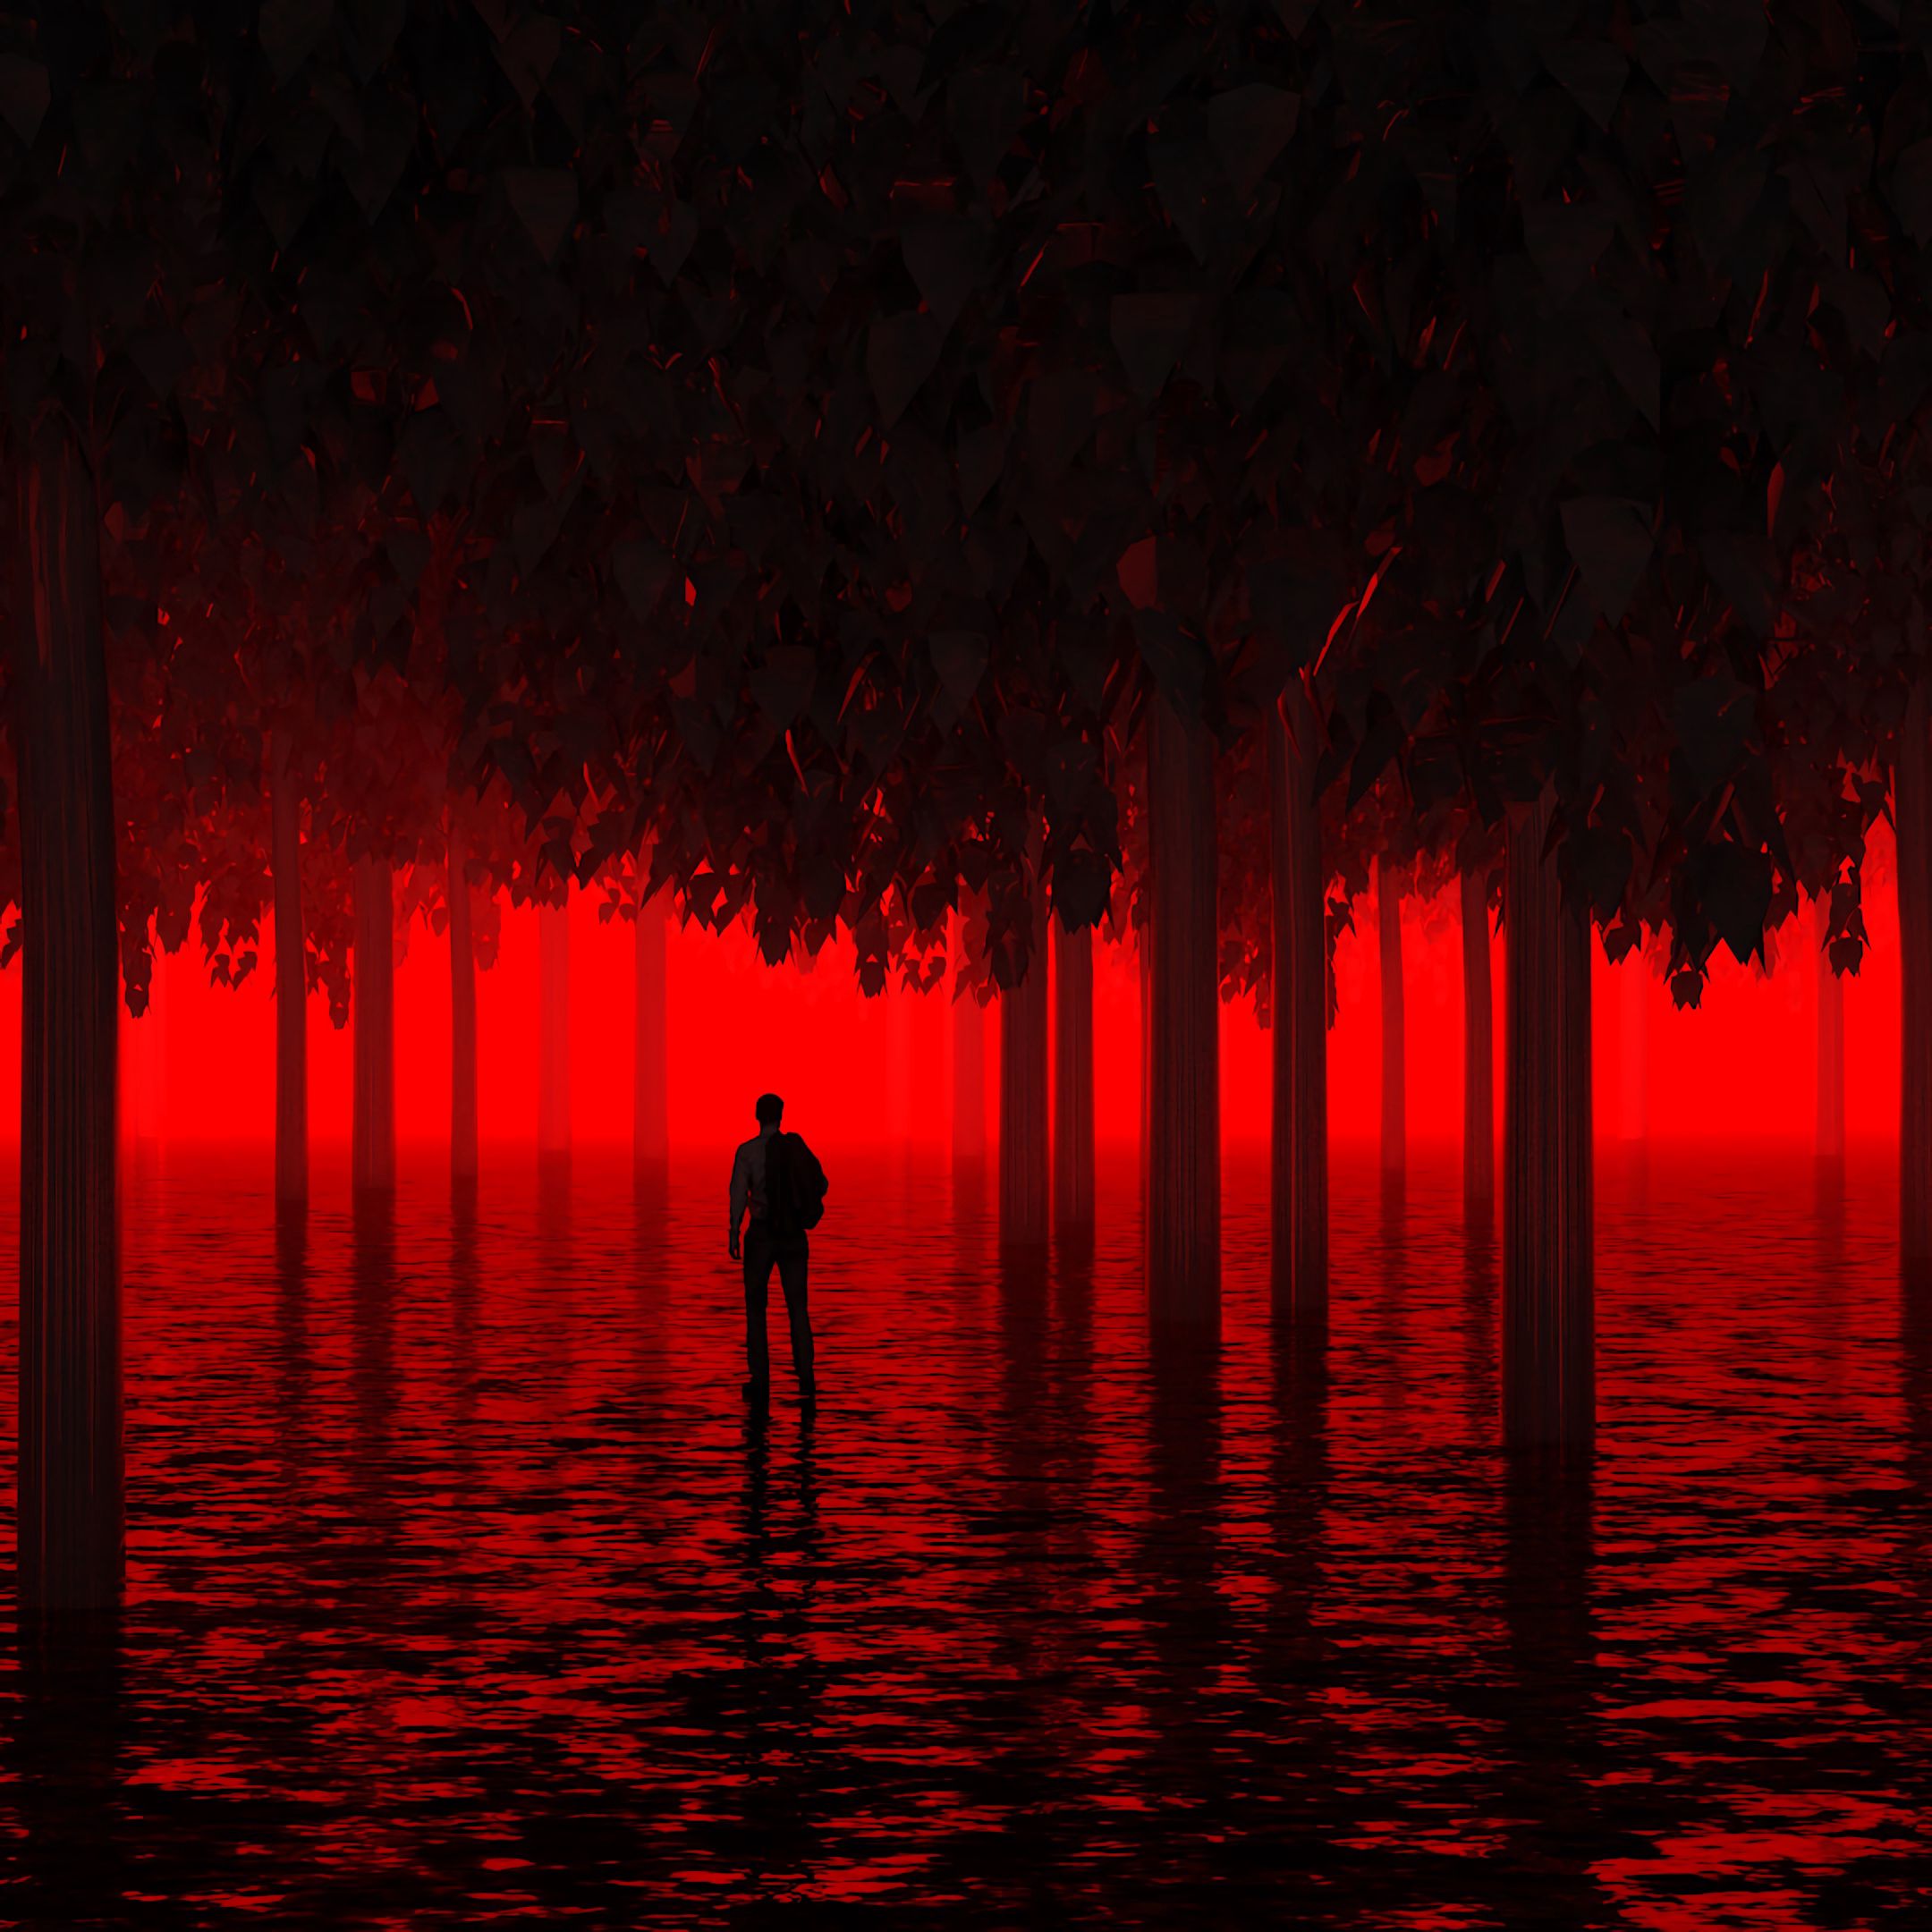 wallpapers light, neon, human, dark, water, trees, red, shine, person, flooded, submerged